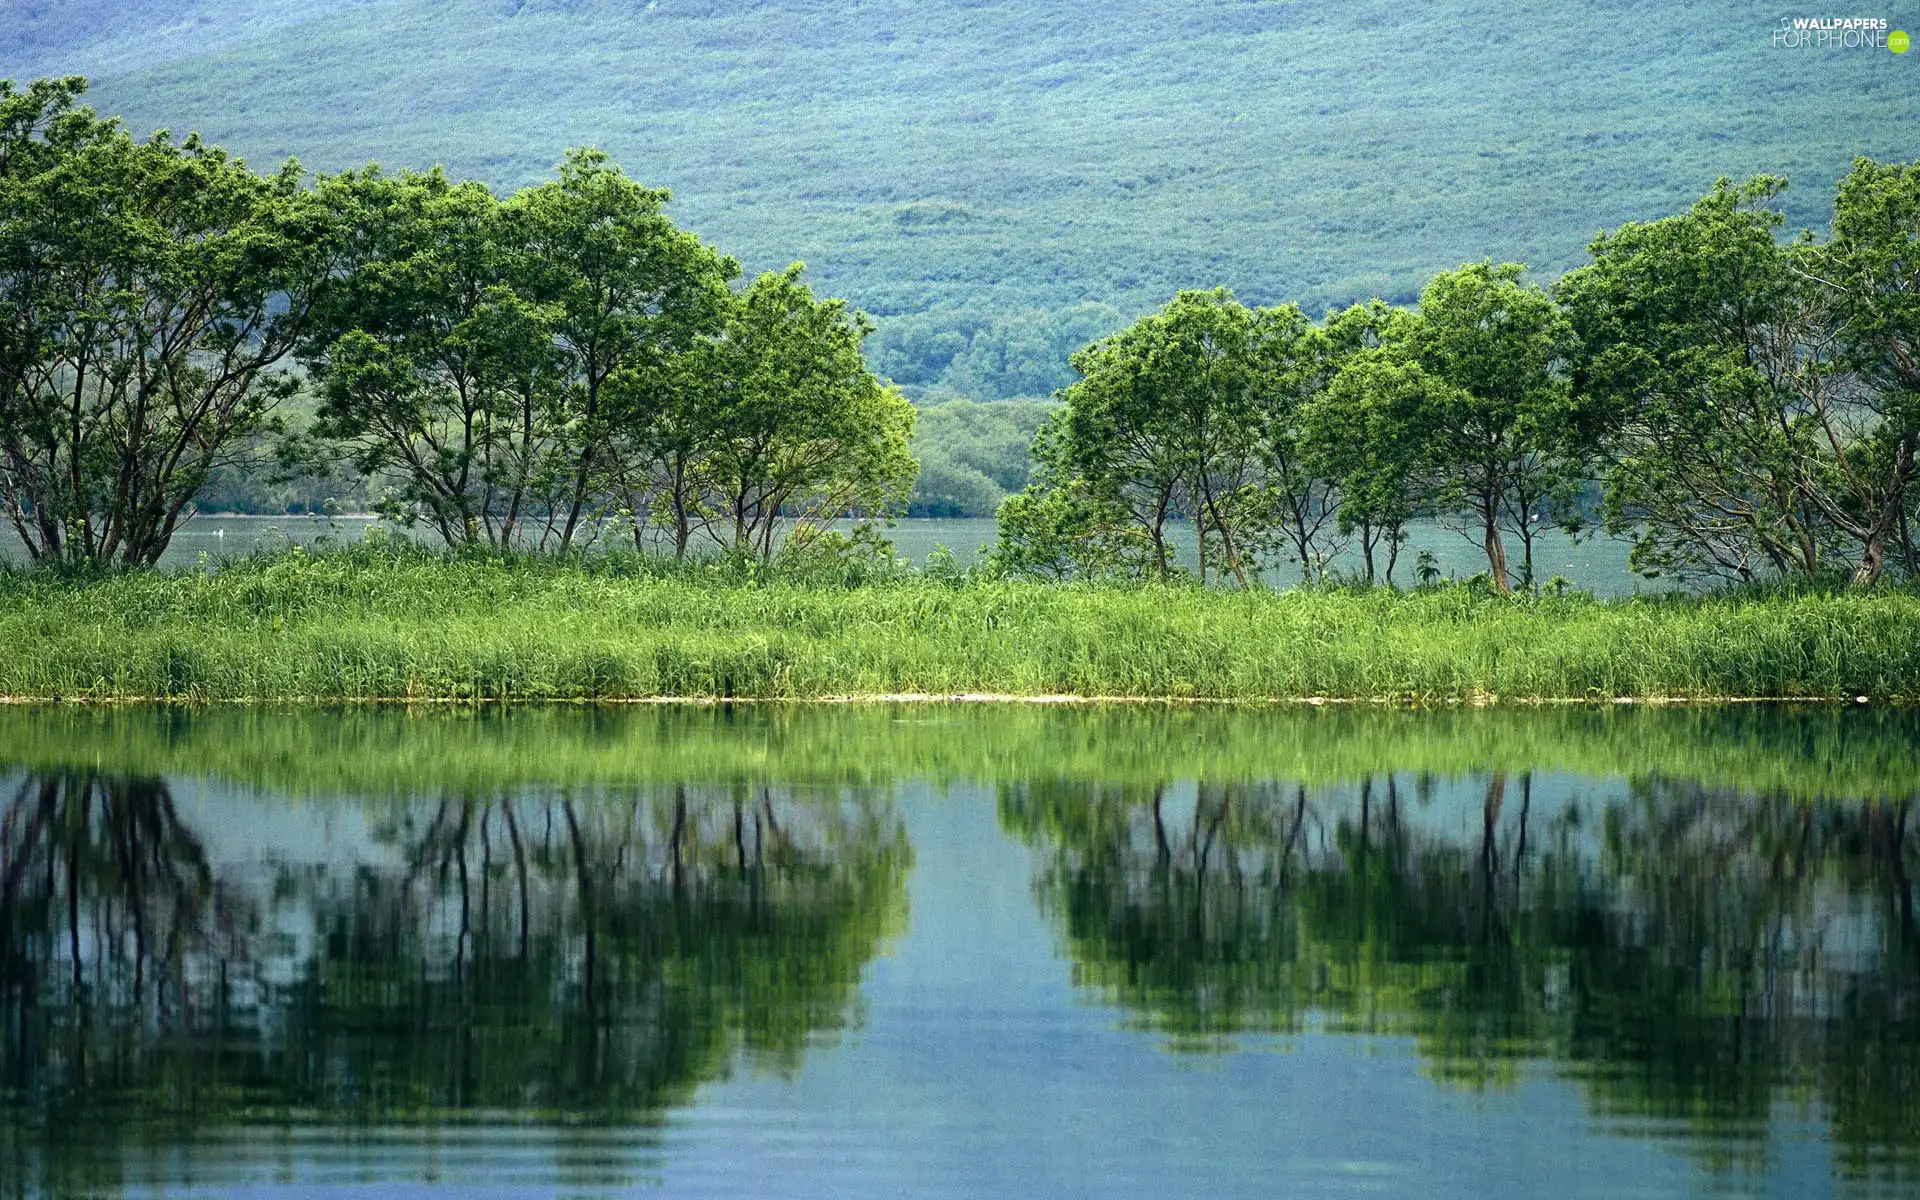 lake, trees, viewes, grass